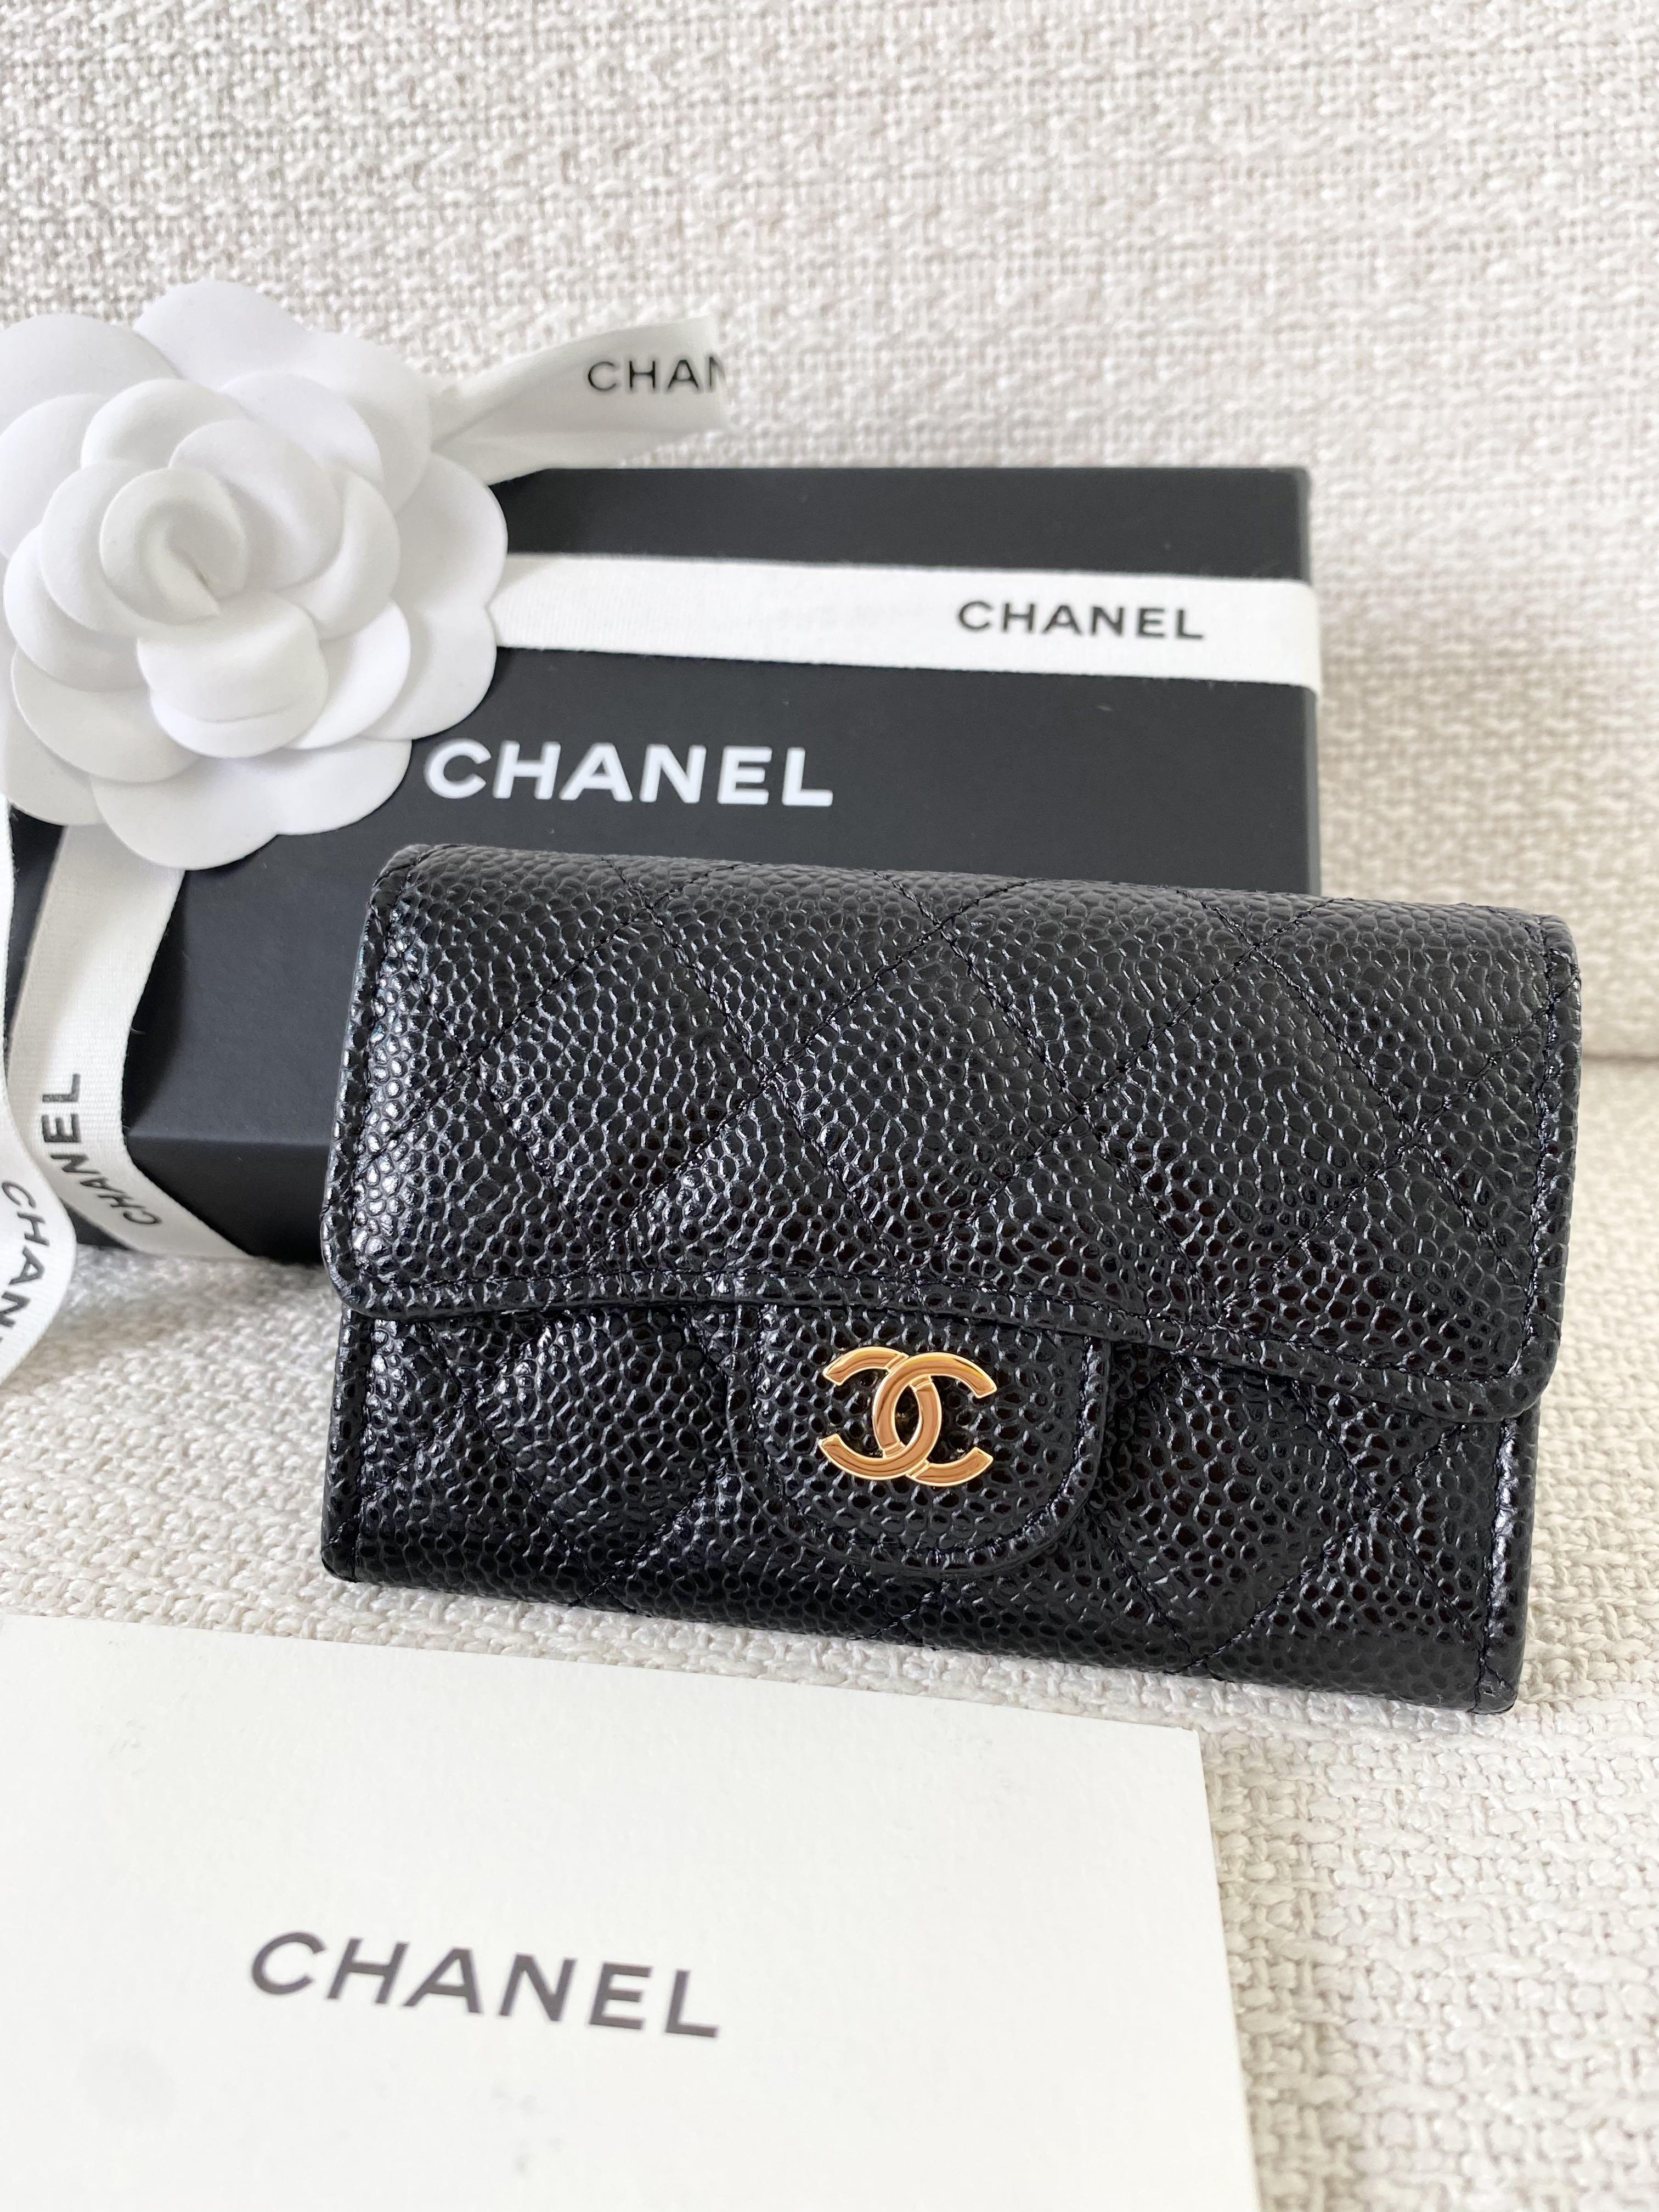 Tokio3388 - CHANEL So Black Cruise '21 Flap Bag available now